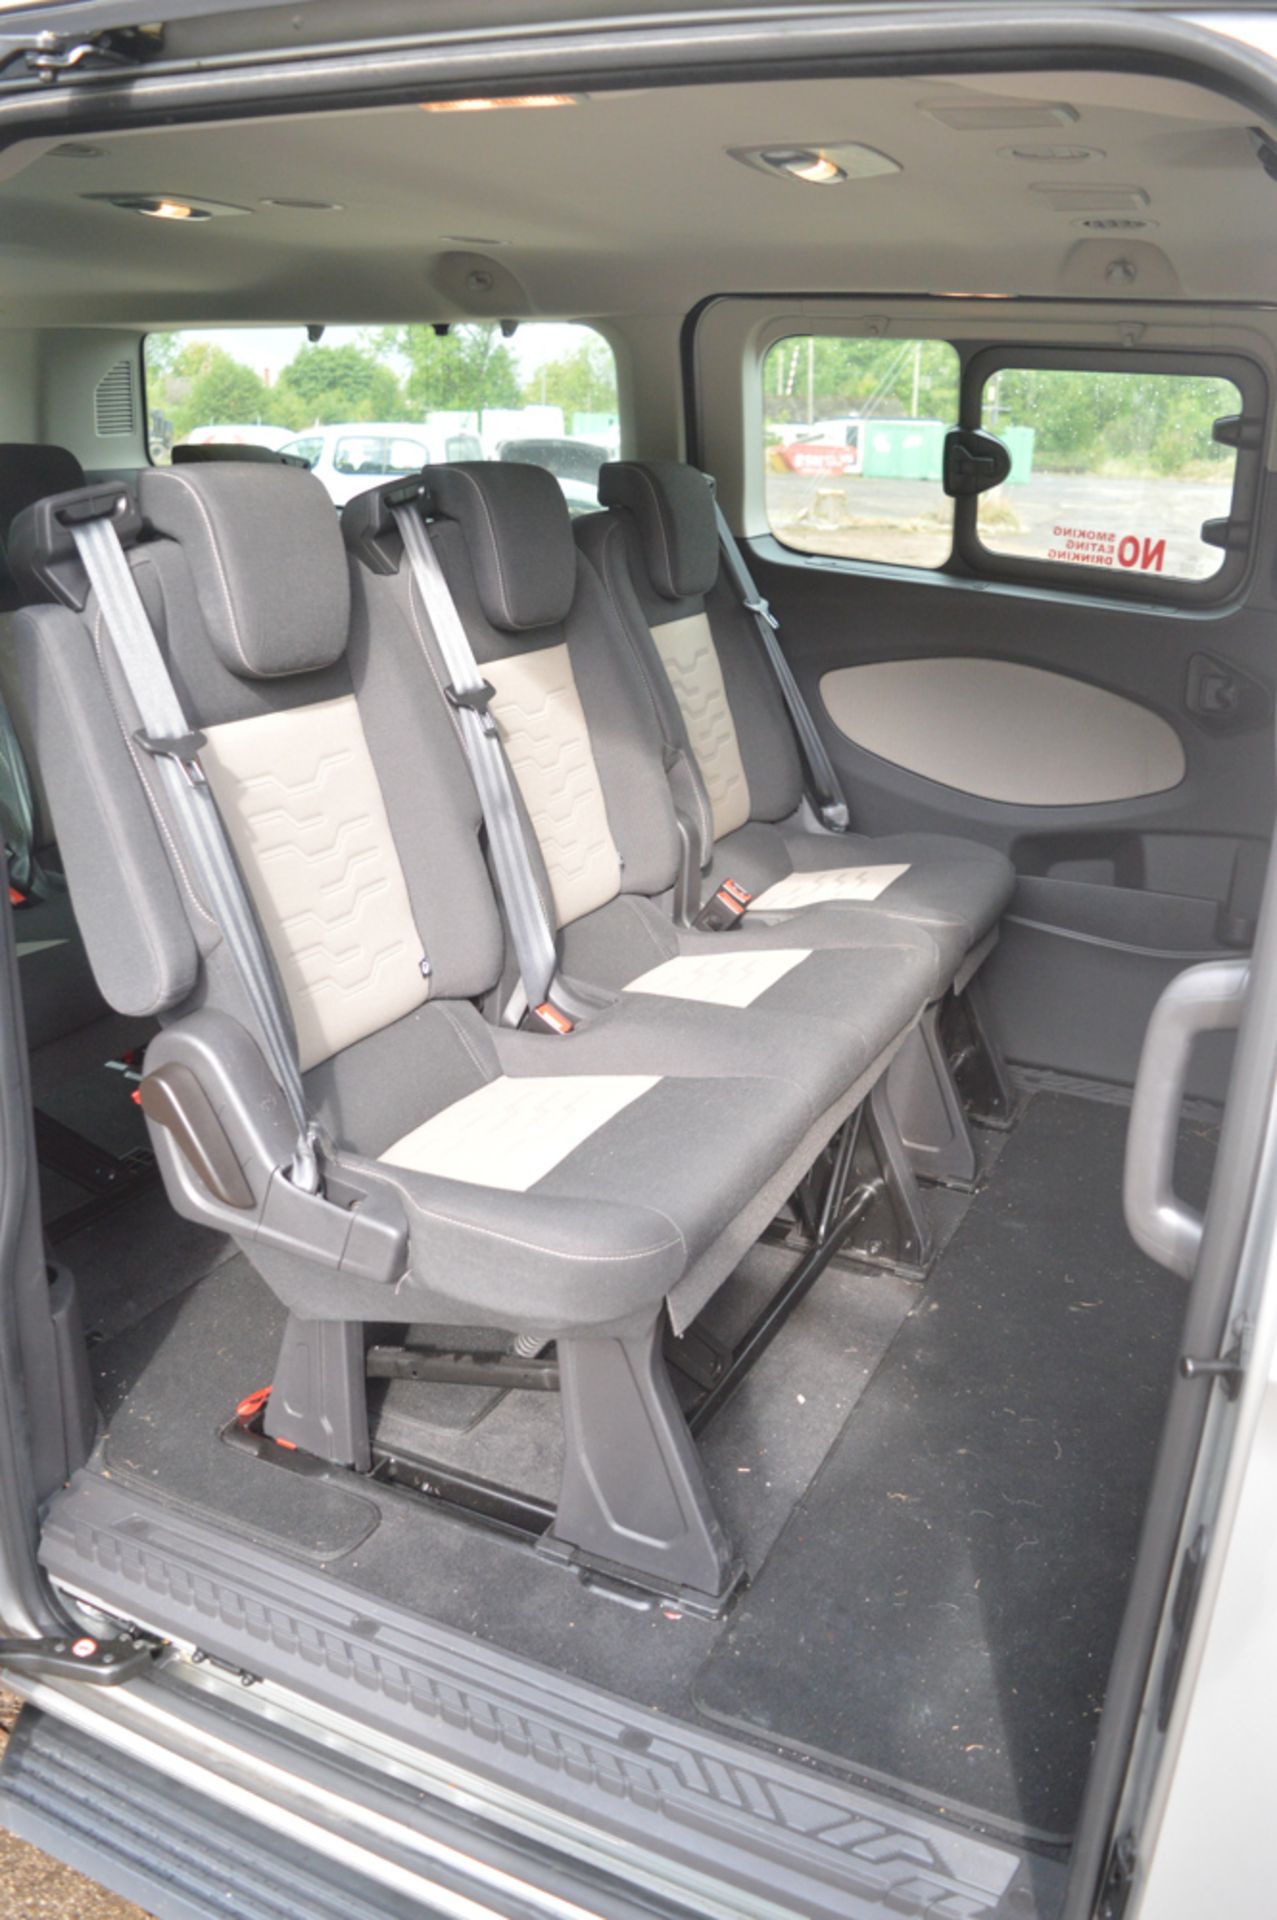 Ford Tourneo Custom 8 seat minibus  Registration Number: YD66 DTZ Date of Registration: 01/09/2016 - Image 12 of 12